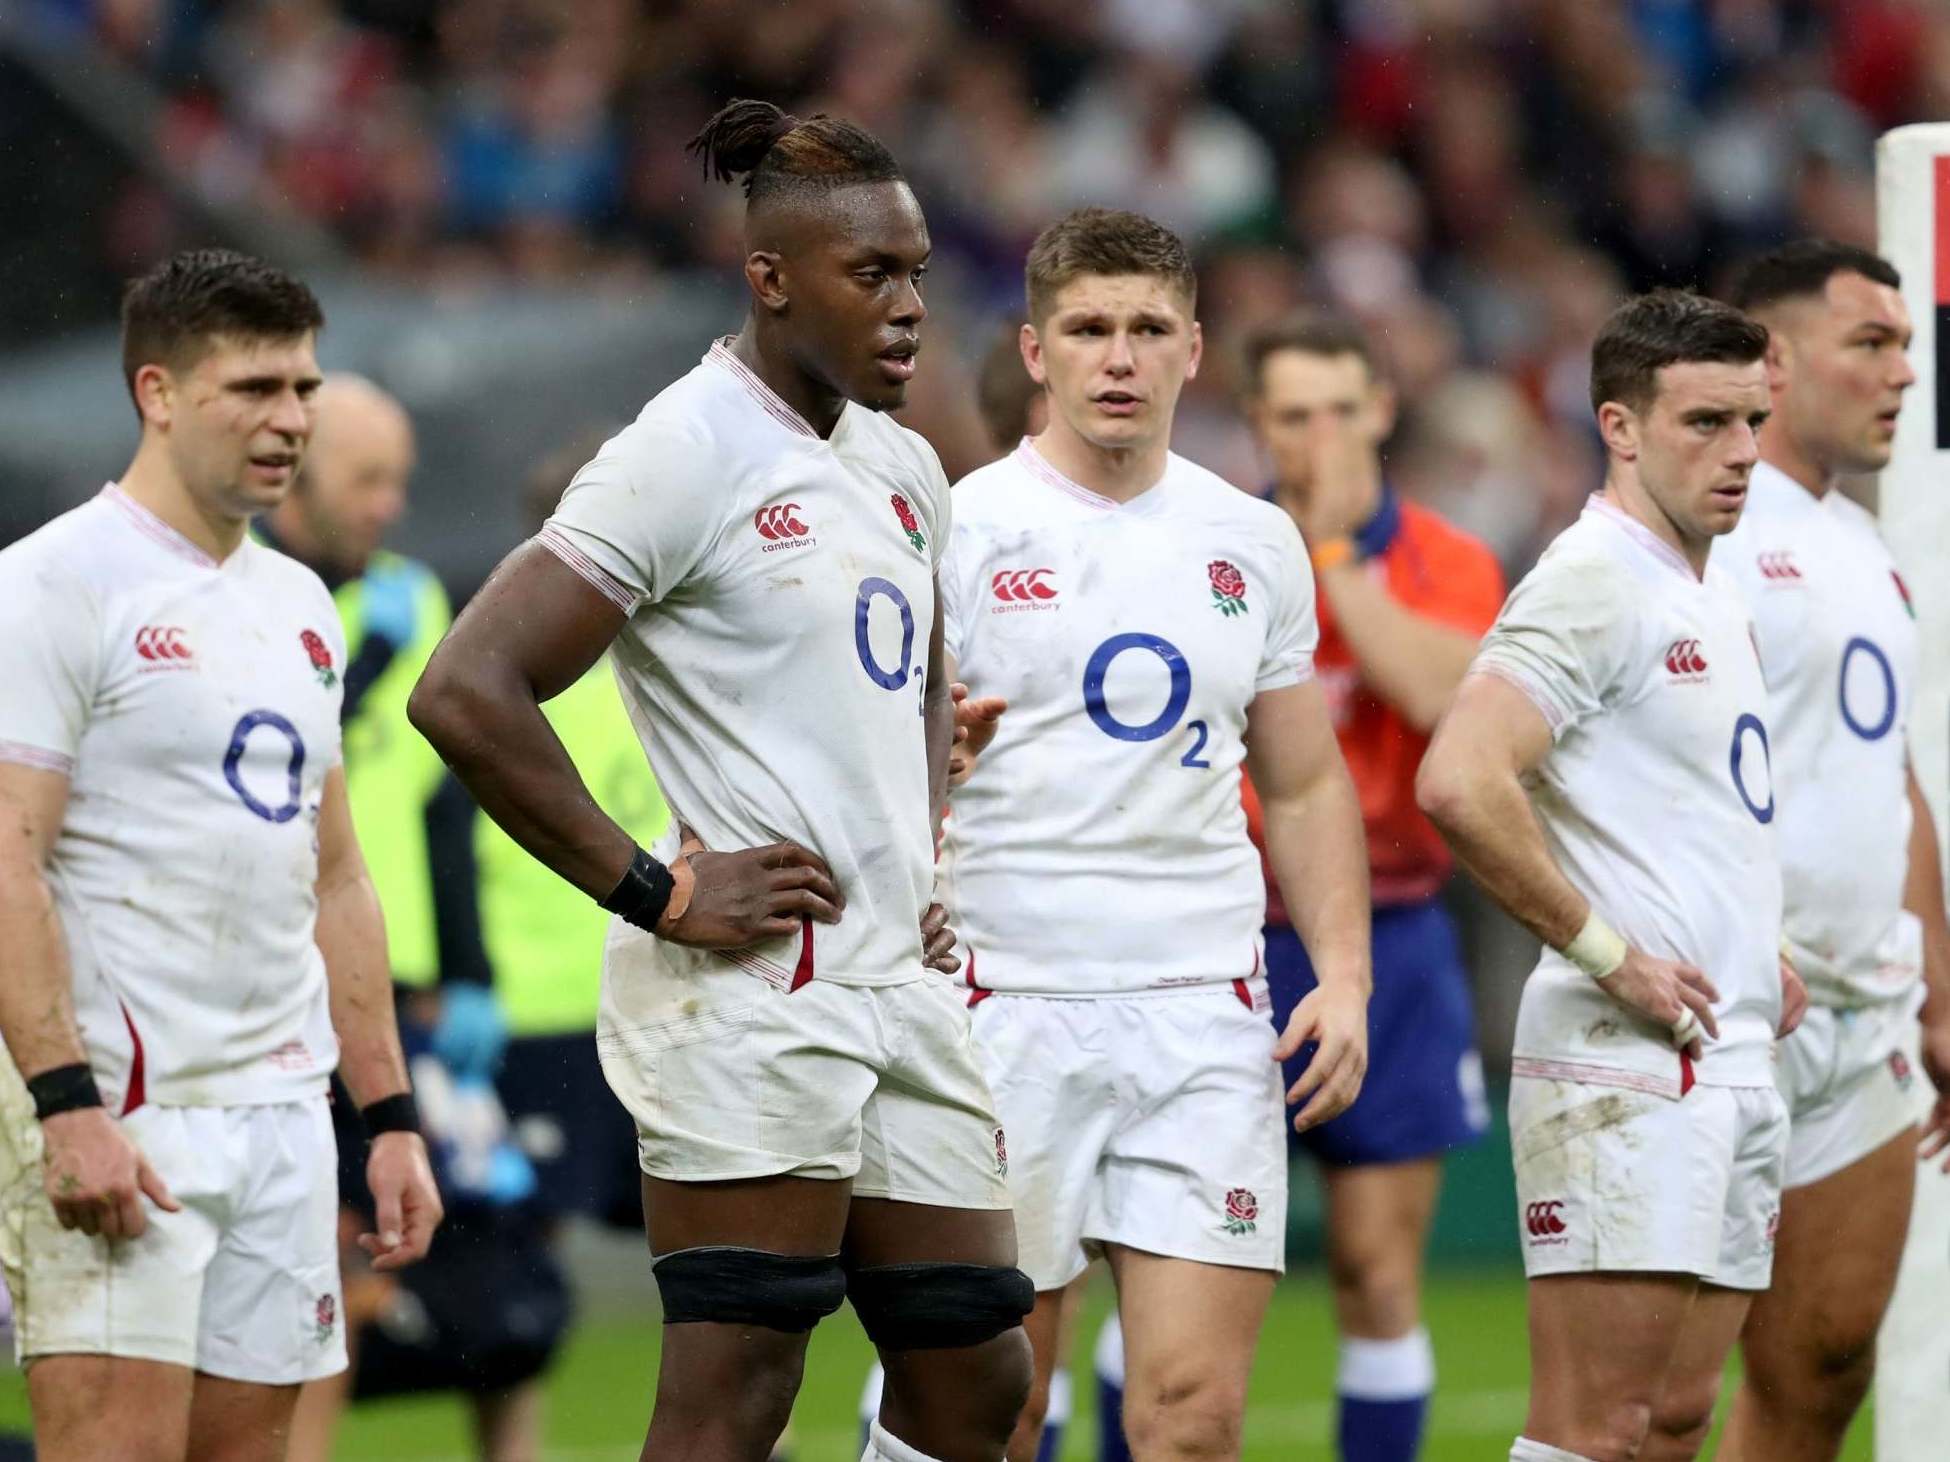 England have lost back-to-back Tests against South Africa and France